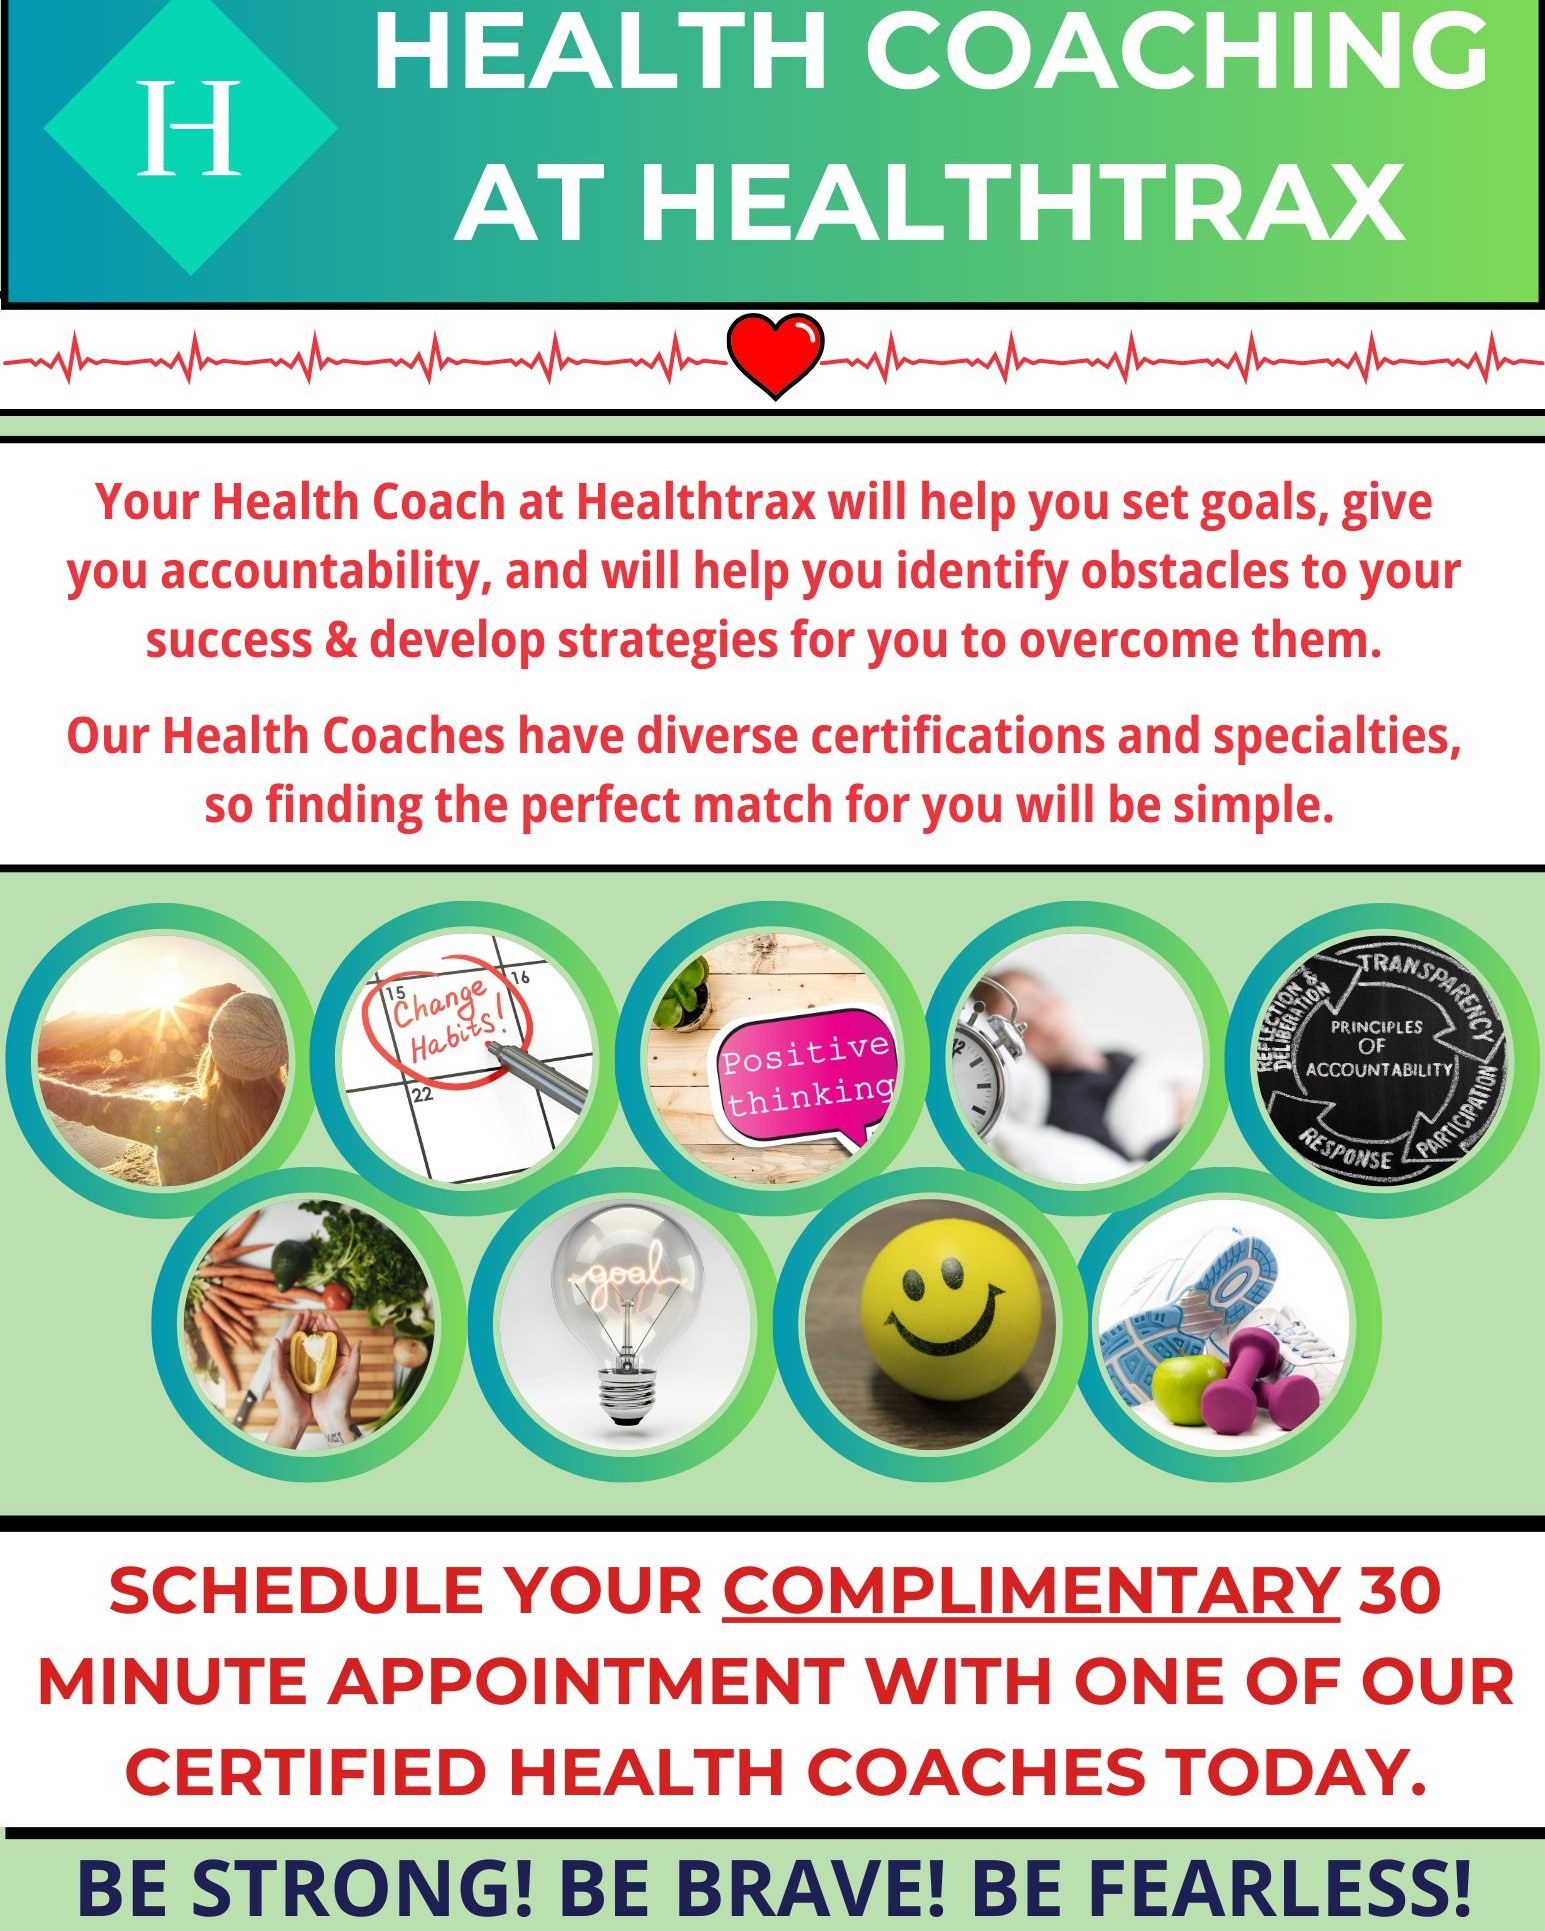 Let us help you reach your wellness goals!! 

Health coaching encompasses things such as helping you change habits, giving you accountability, navigating nutrition trends, best fitness program for you, stress relief practices, and so much more. 

Boo